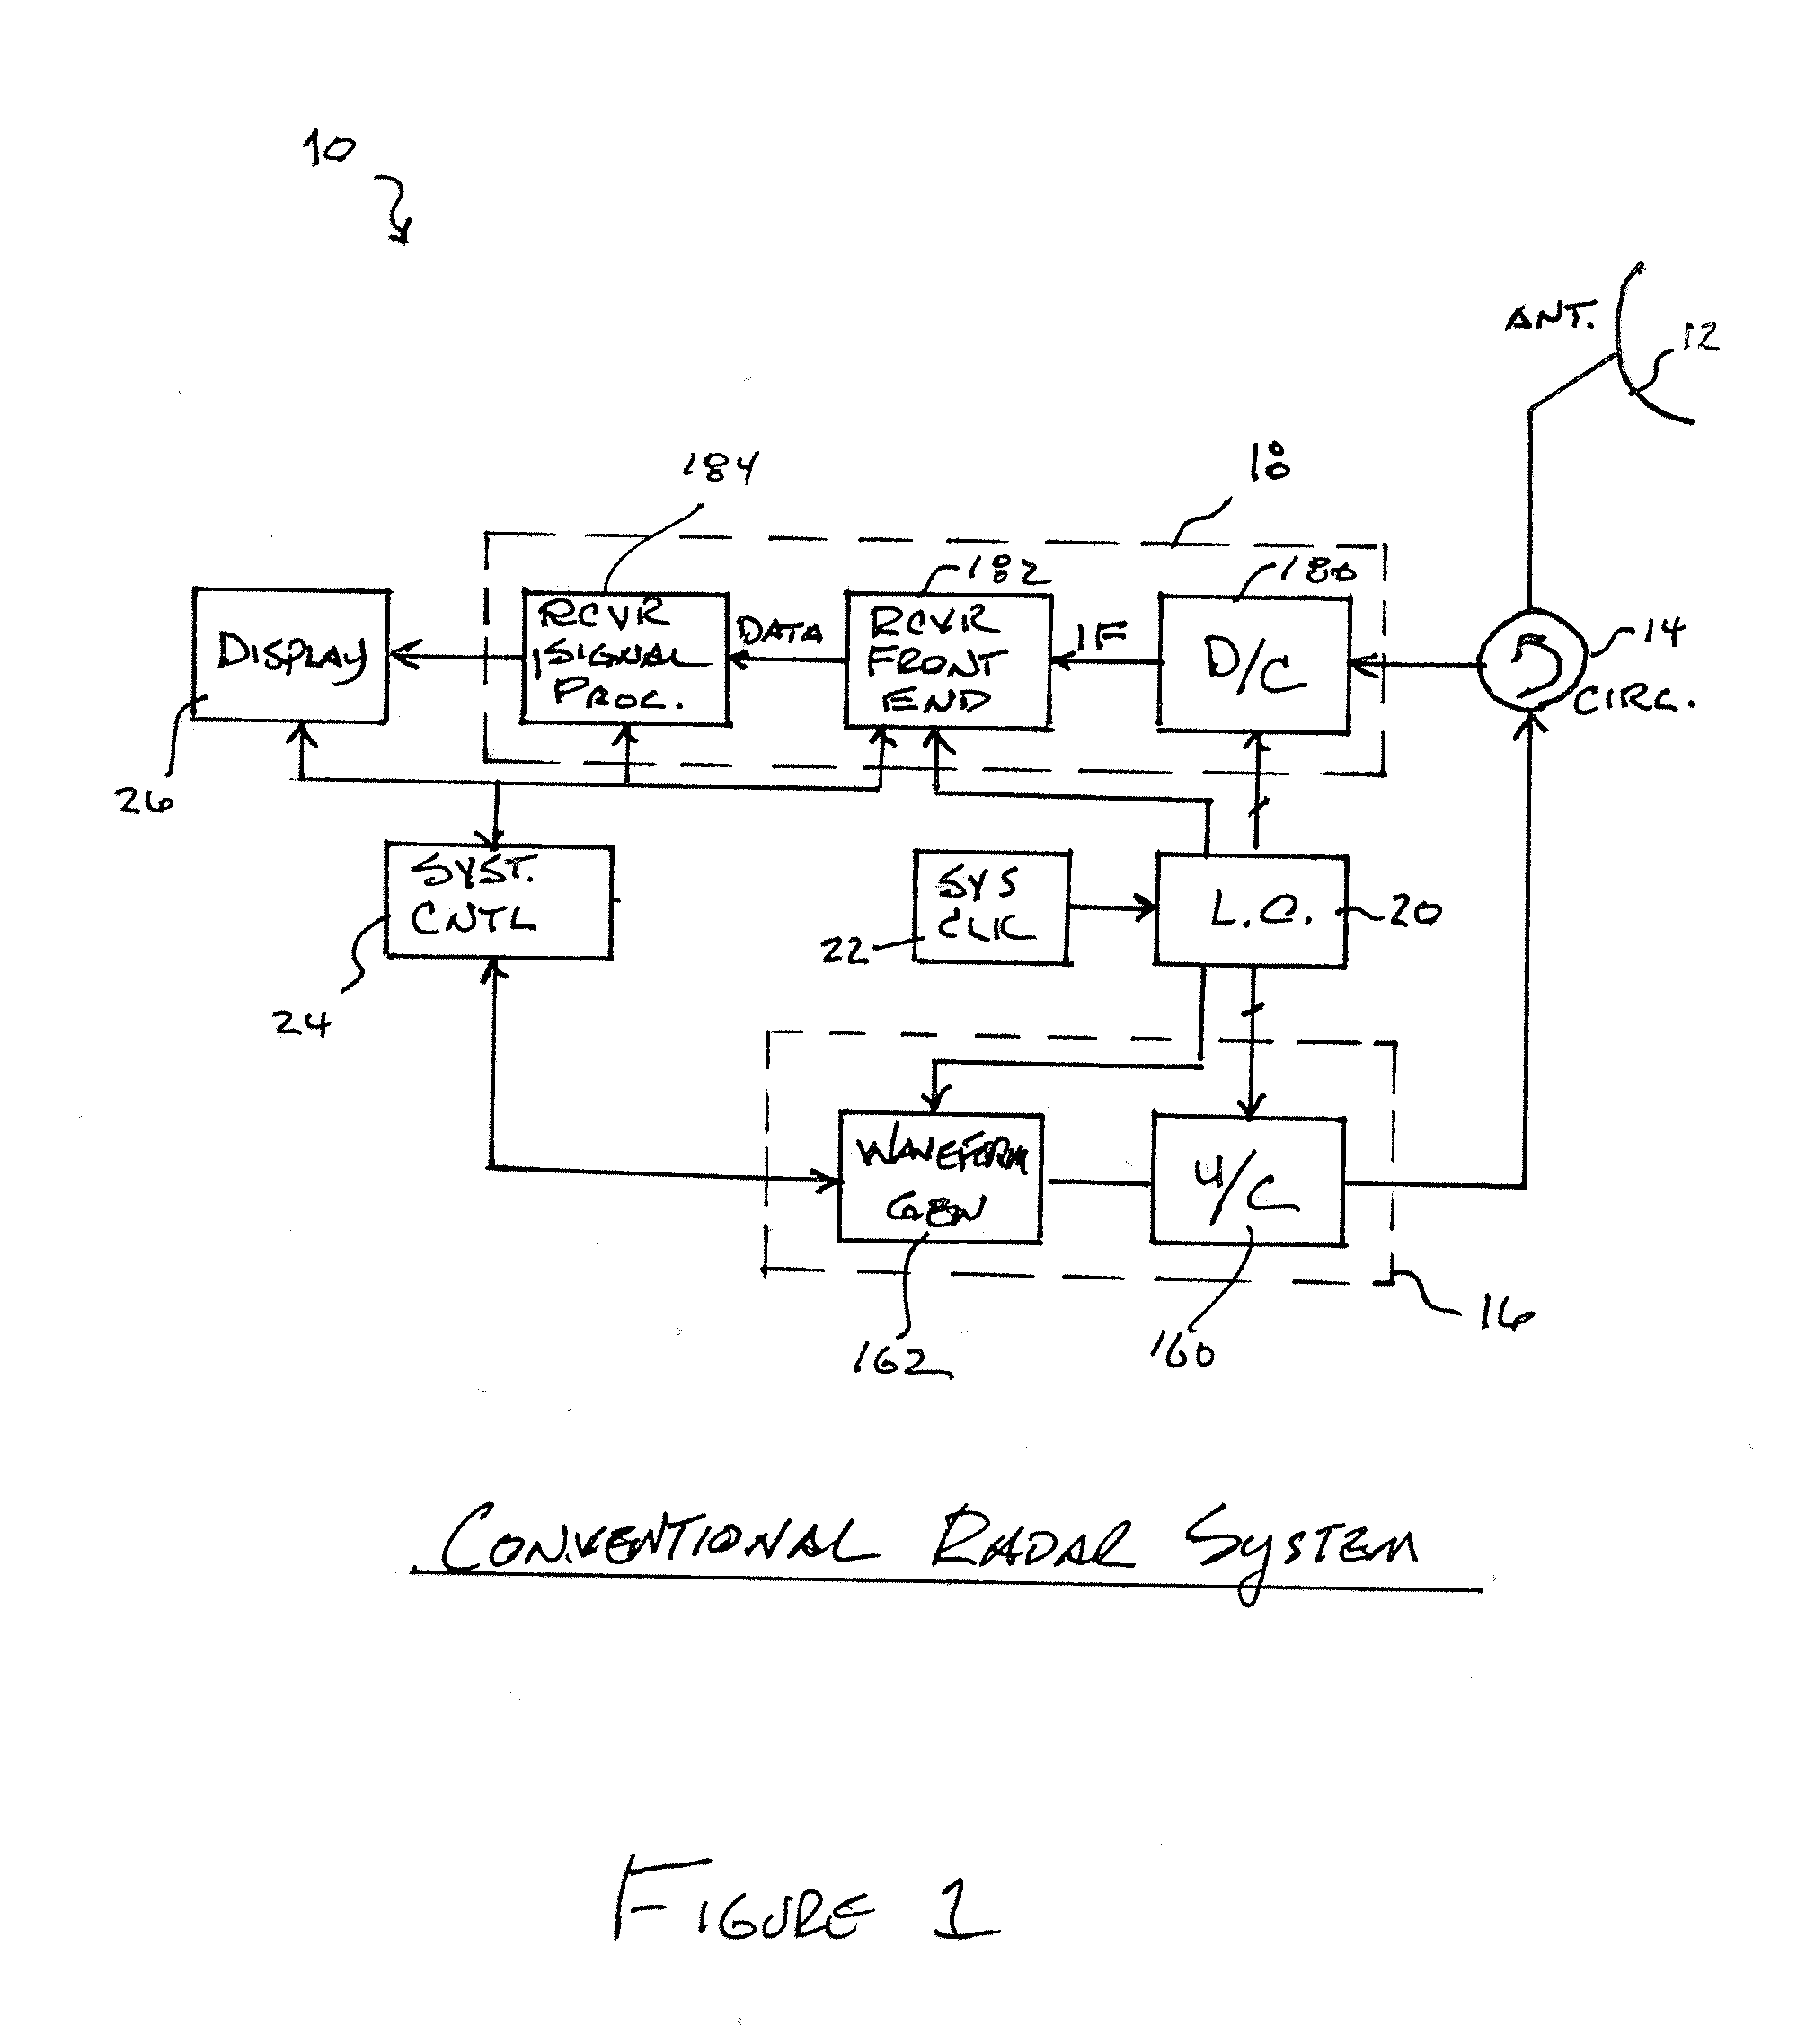 System and Method for Coherent Frequency Switching in DDS Architectures